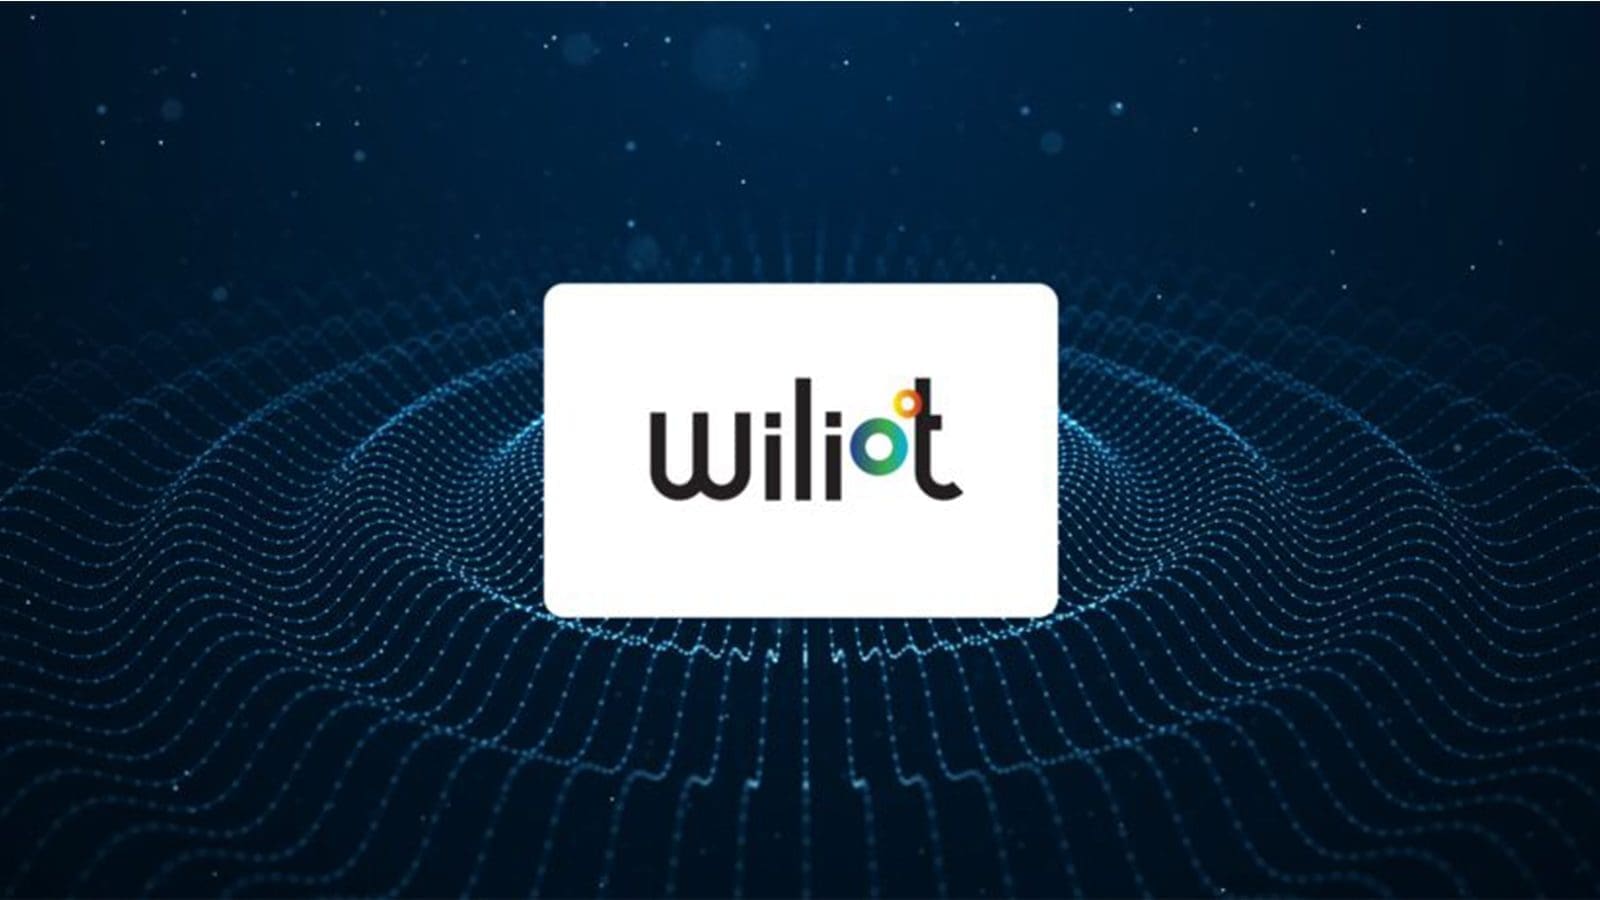 Wiliot introduces real-time humidity sensing technology, enhances supply chain visibility